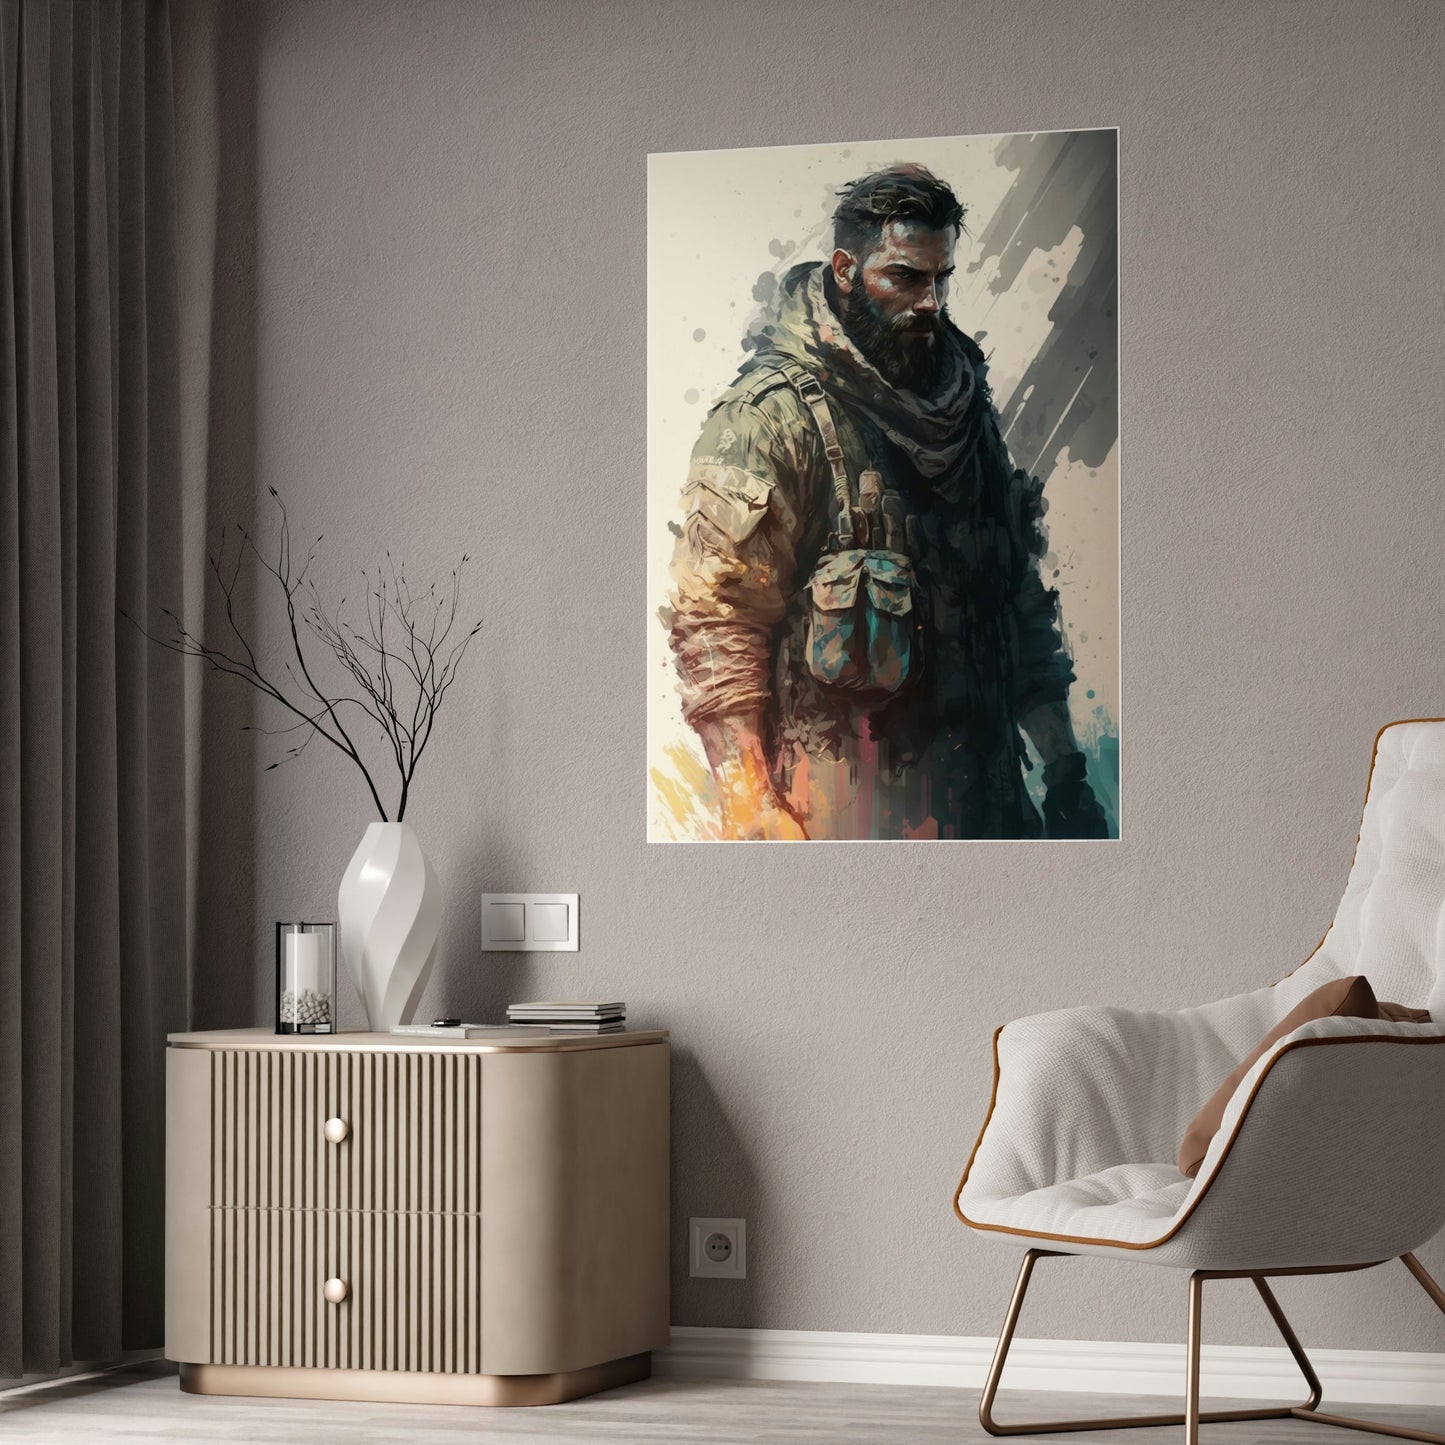 Military Strategy: Call of Duty Art on Framed Canvas and Posters